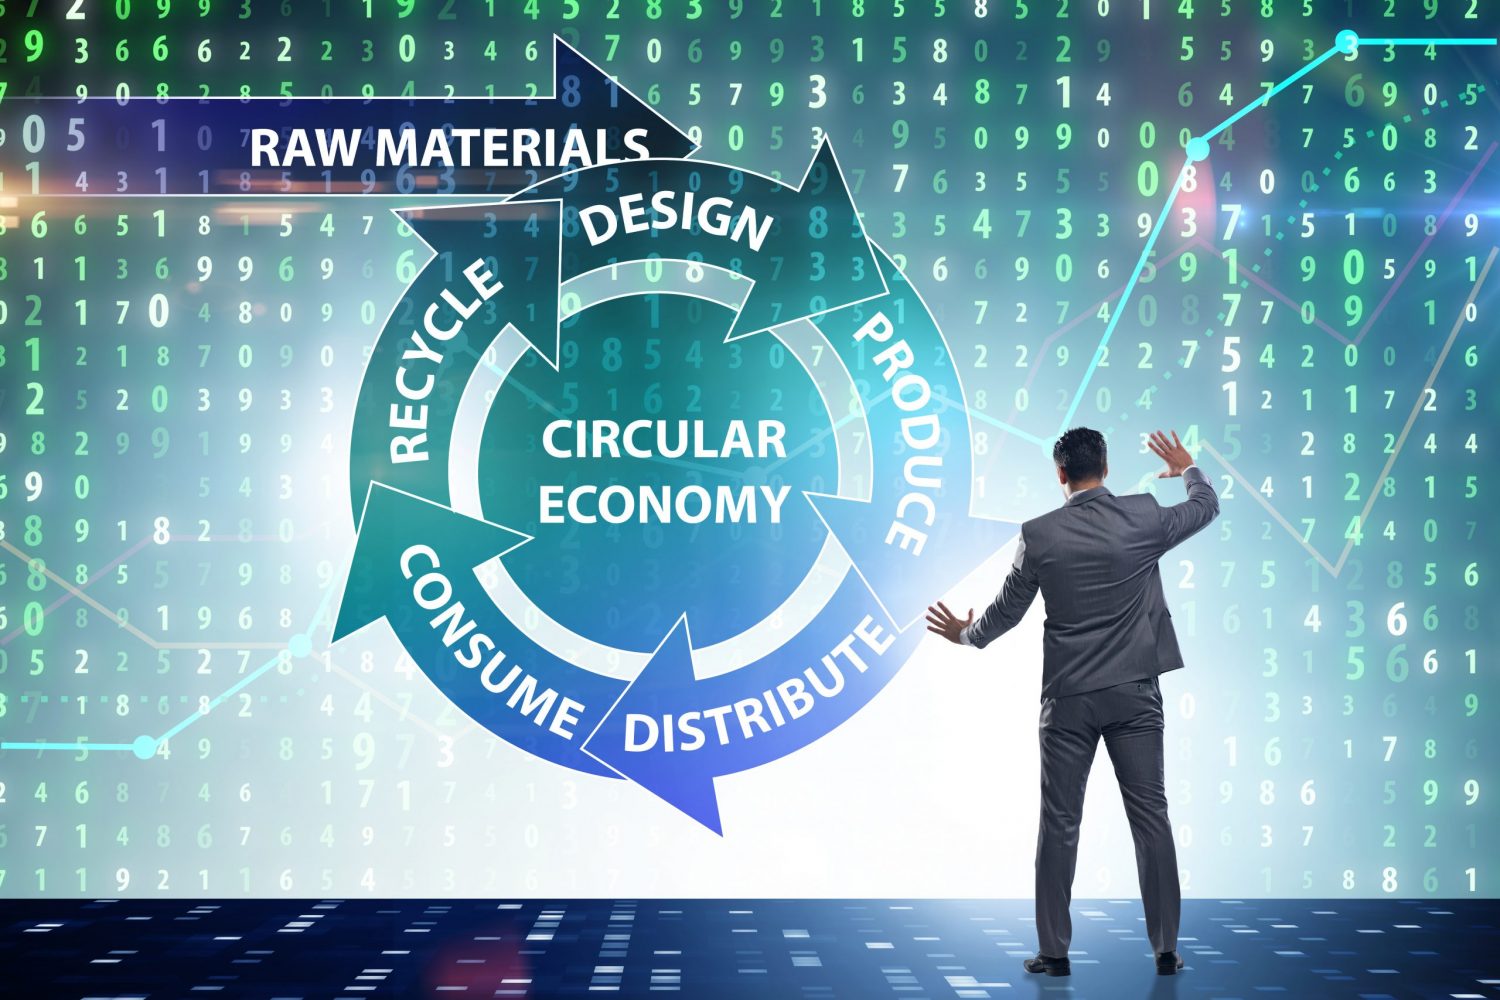 Collection of flexible packaging waste is central to achieving a circular economy